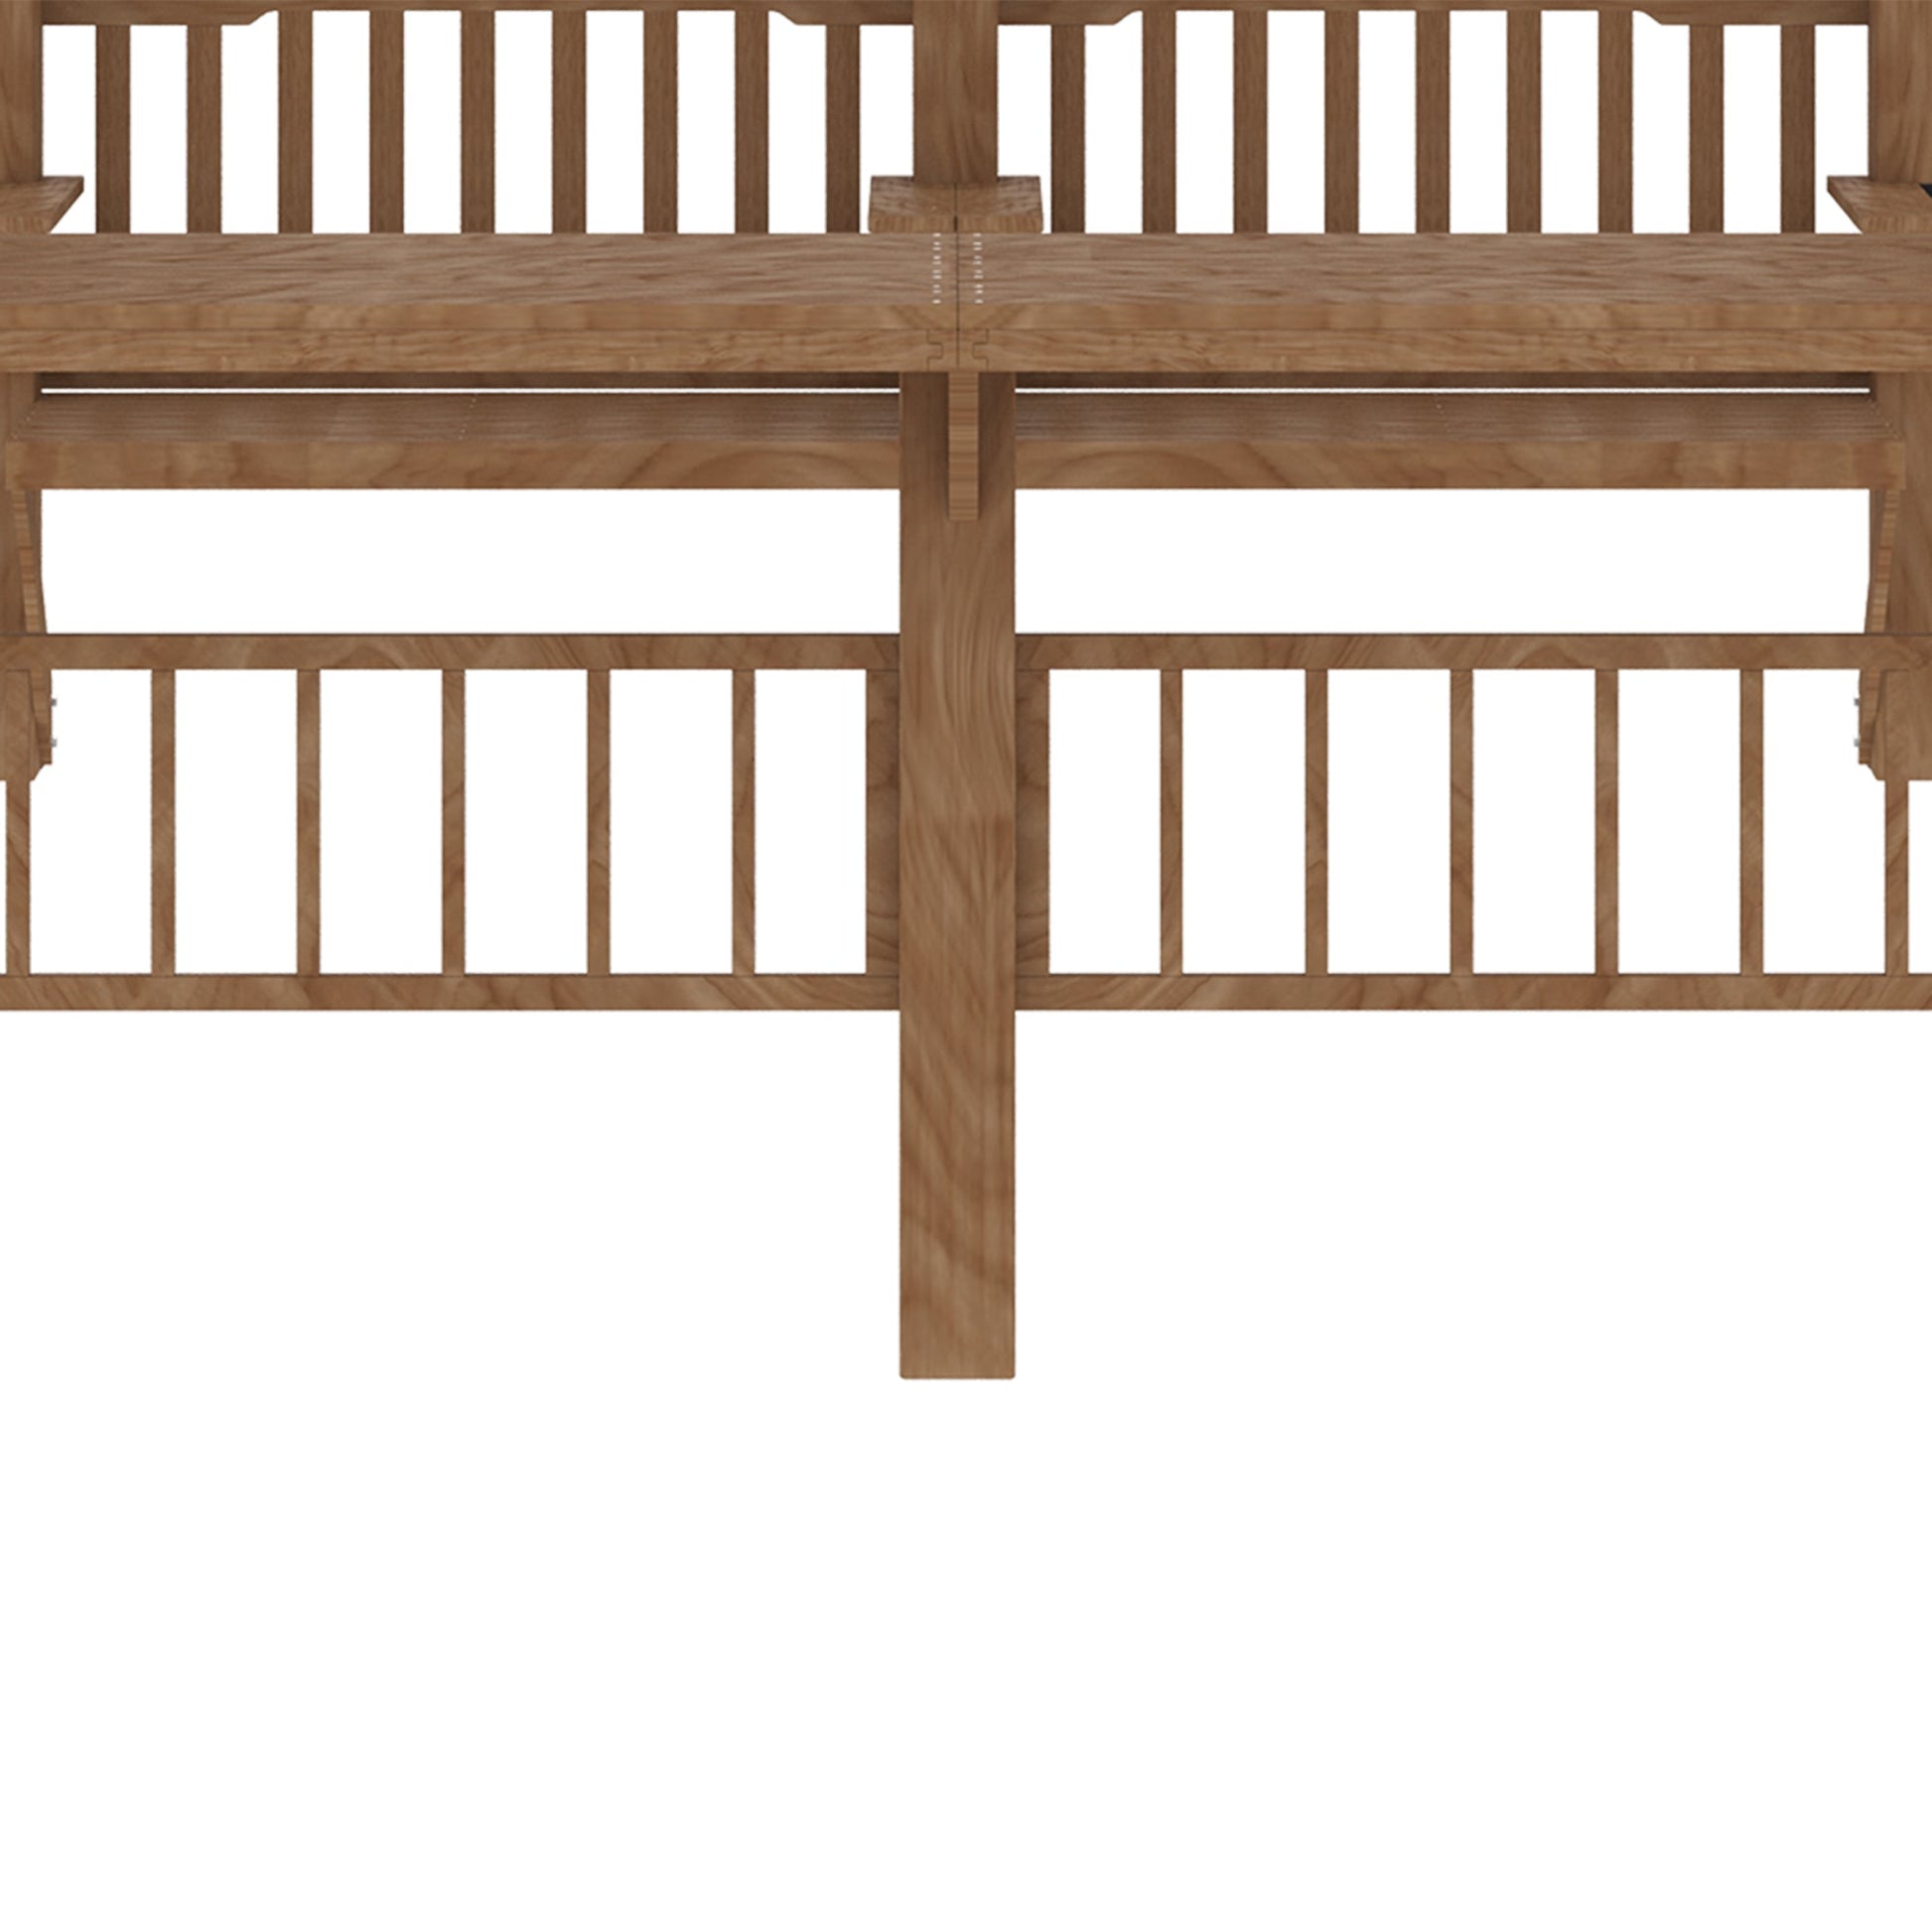 14' x 10' Outdoor Pergola, Wooden Gazebo Grill Canopy with Bar Counters and Seating Benches, for Garden, Patio, Backyard, Deck at Gallery Canada